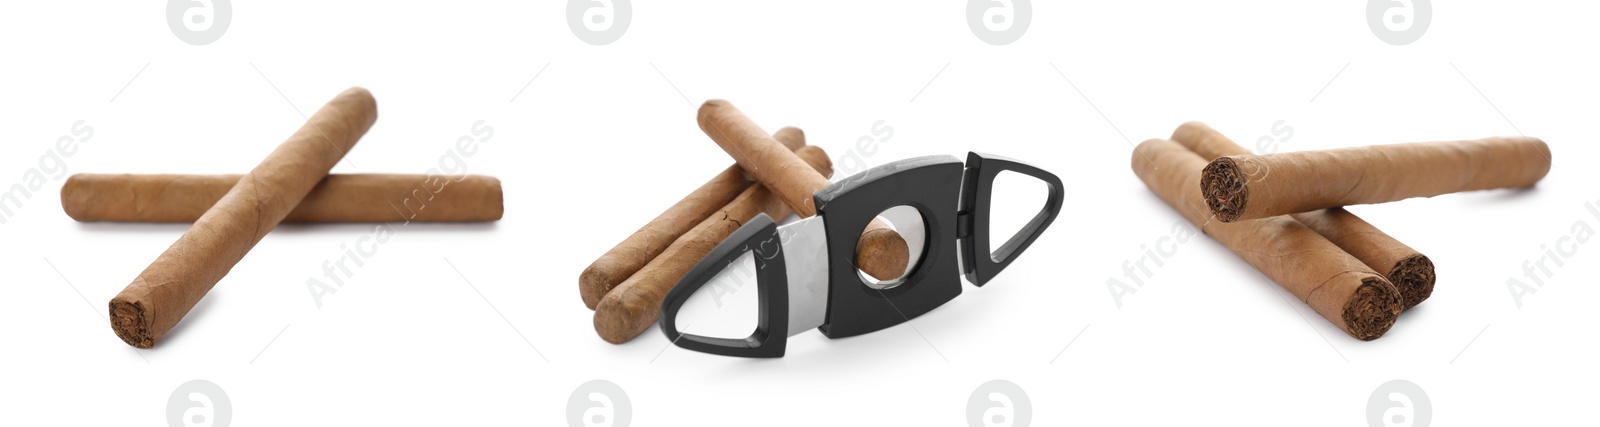 Image of Set with cigars wrapped in tobacco leaves and guillotine cutter on white background. Banner design